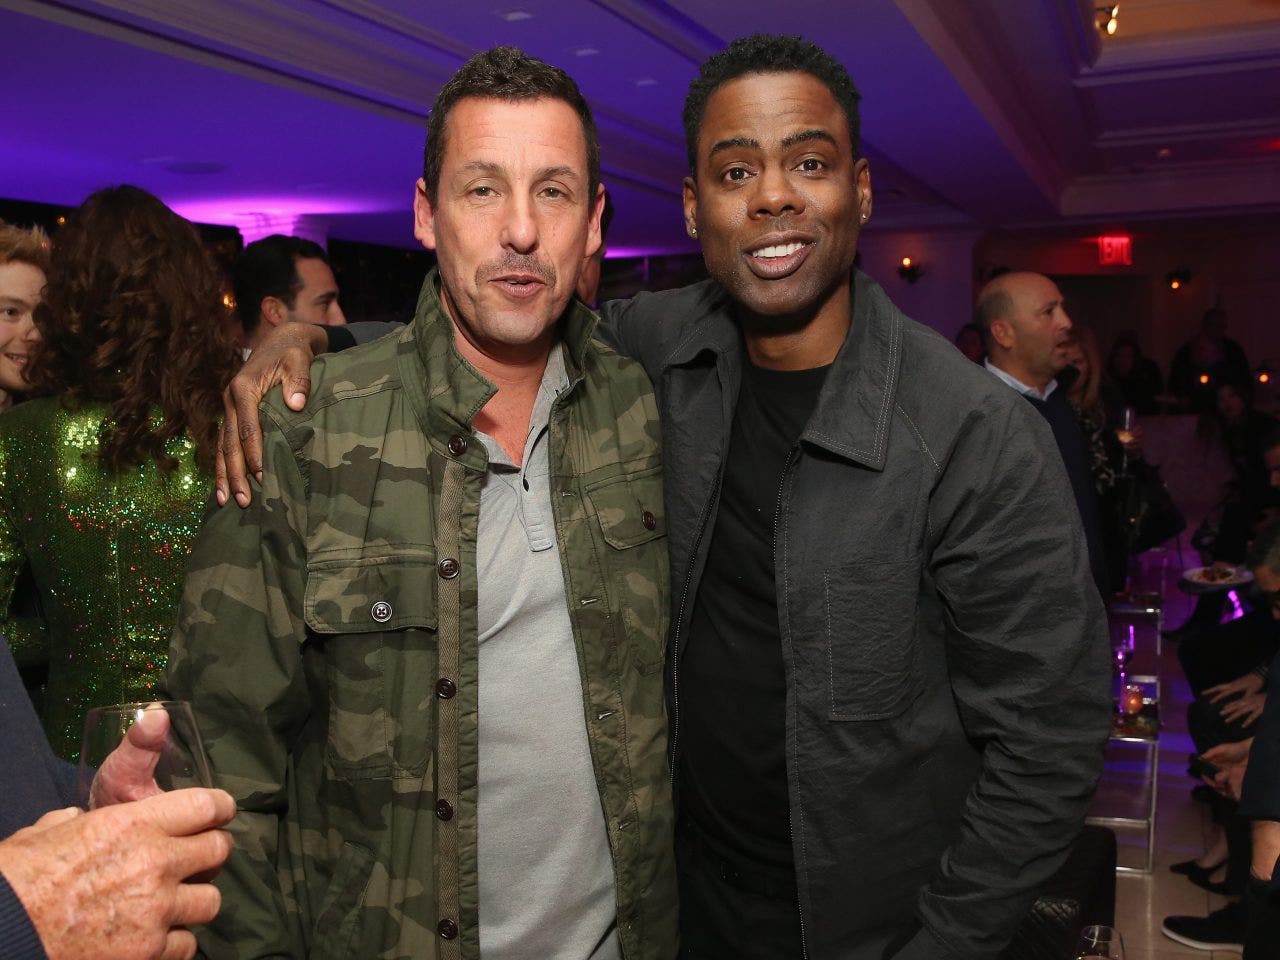 Chris Rock gets support from Adam Sandler following Oscars incident: 'Love you buddy'